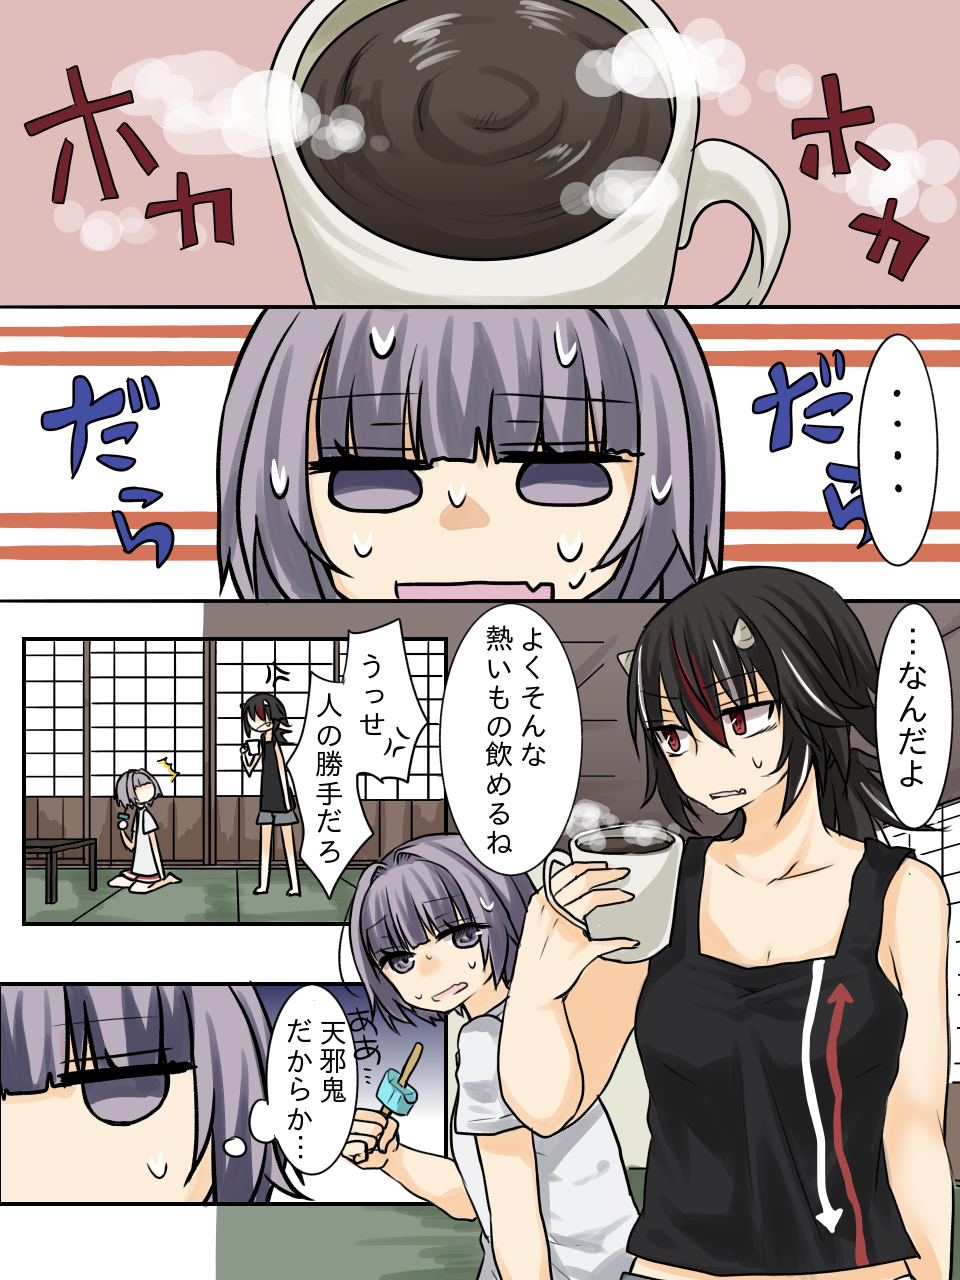 2girls alternate_costume black_hair coffee comic commentary_request cup highres horns hot kijin_seija mimoto_(aszxdfcv) multicolored_hair multiple_girls no_hat no_headwear popsicle purple_hair red_eyes redhead steam streaked_hair sukuna_shinmyoumaru sweat thought_bubble touhou translation_request violet_eyes white_hair